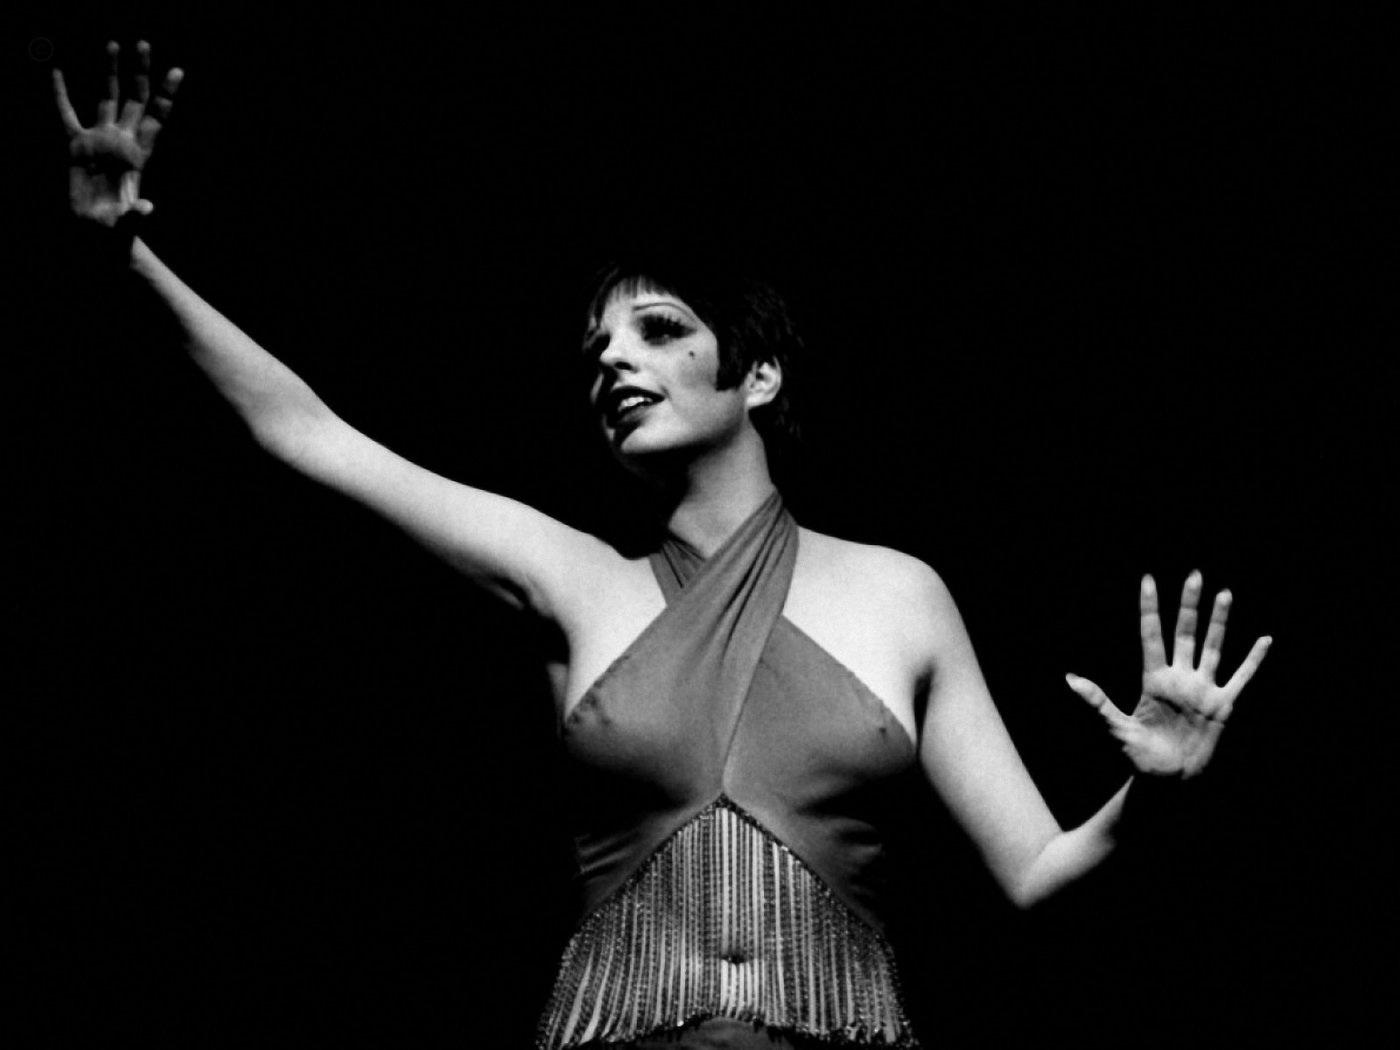 “Here's to a star unlike any other✨ Happy birthday, Liza Minnelli!...